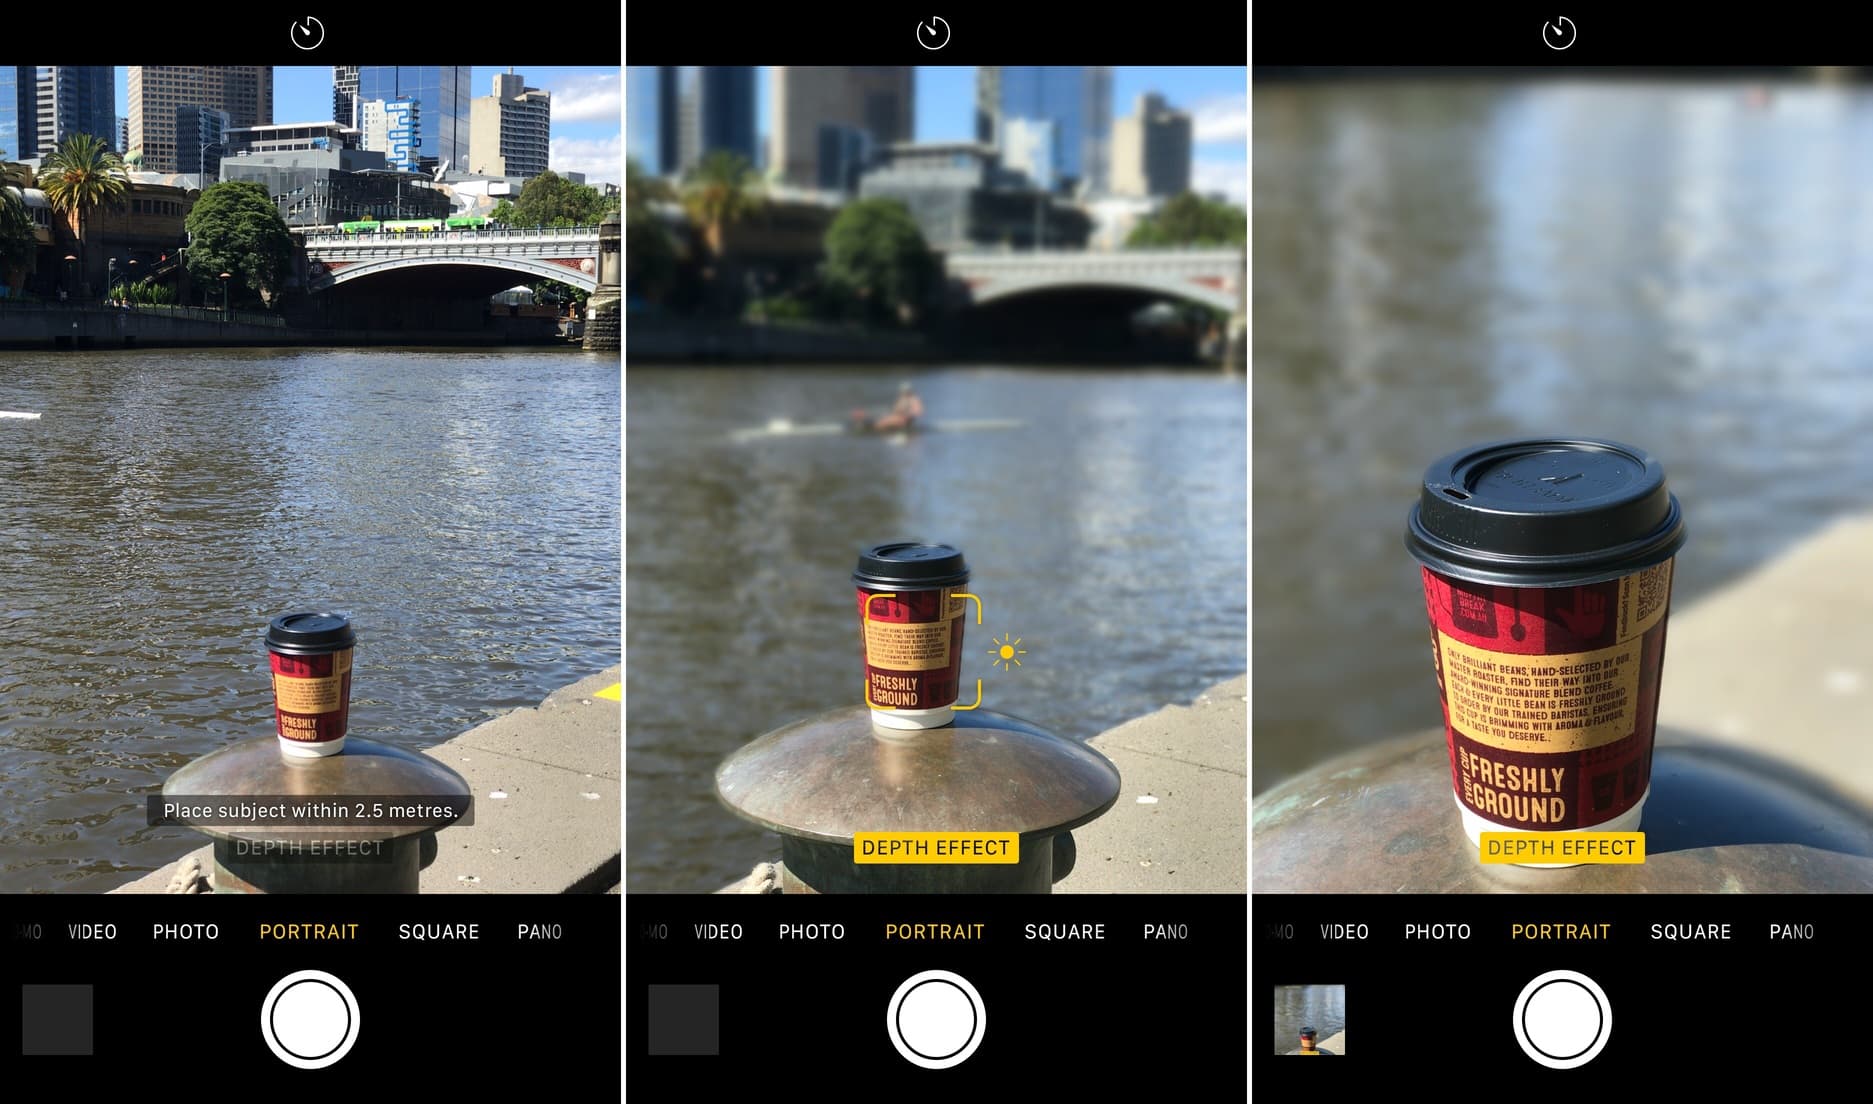 Take main subject size in account when shooting portrait photo on iPhone